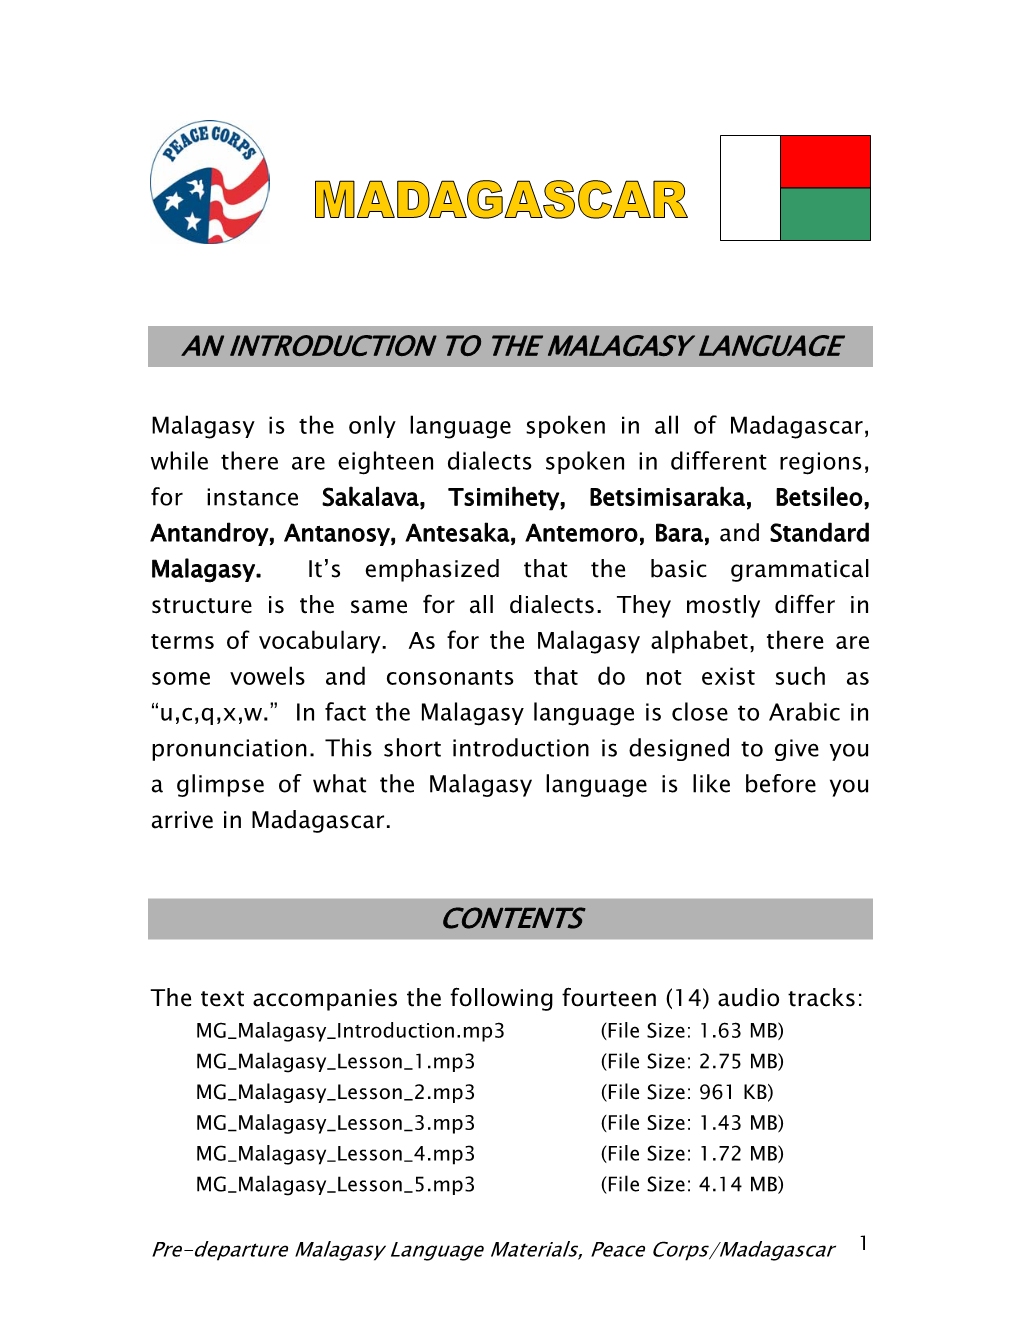 An Introductory to the Malagasy Language